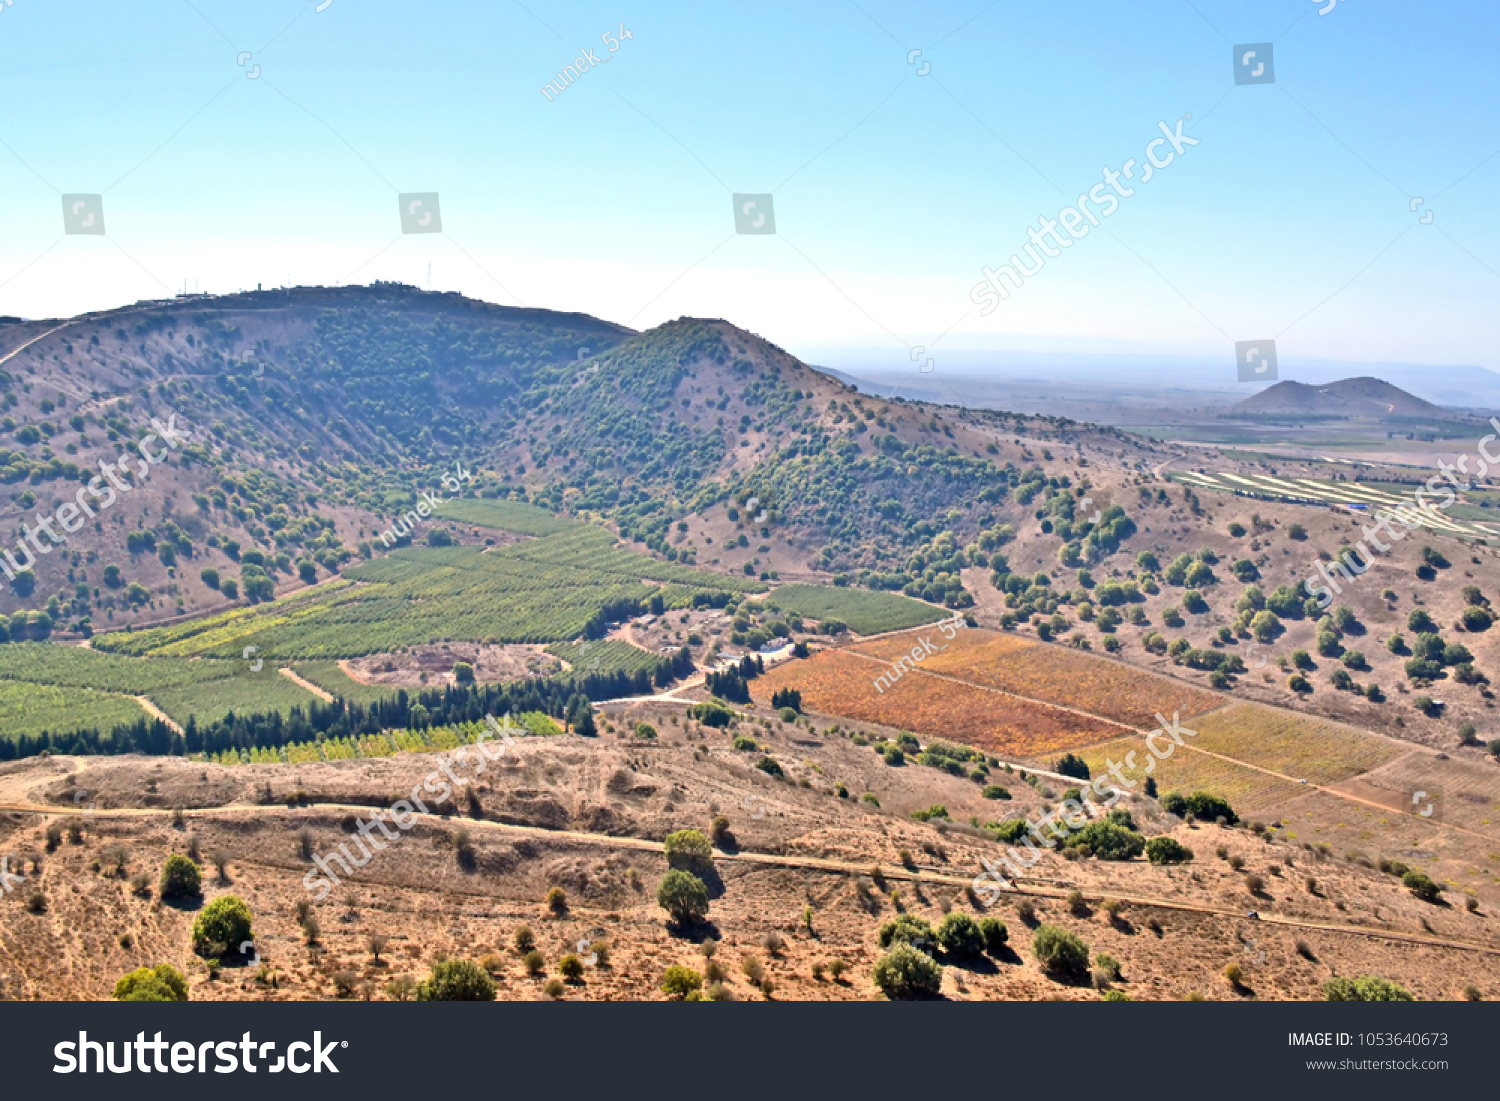 View of the Golan heights from mount Bental, Northern Israel #1053640673